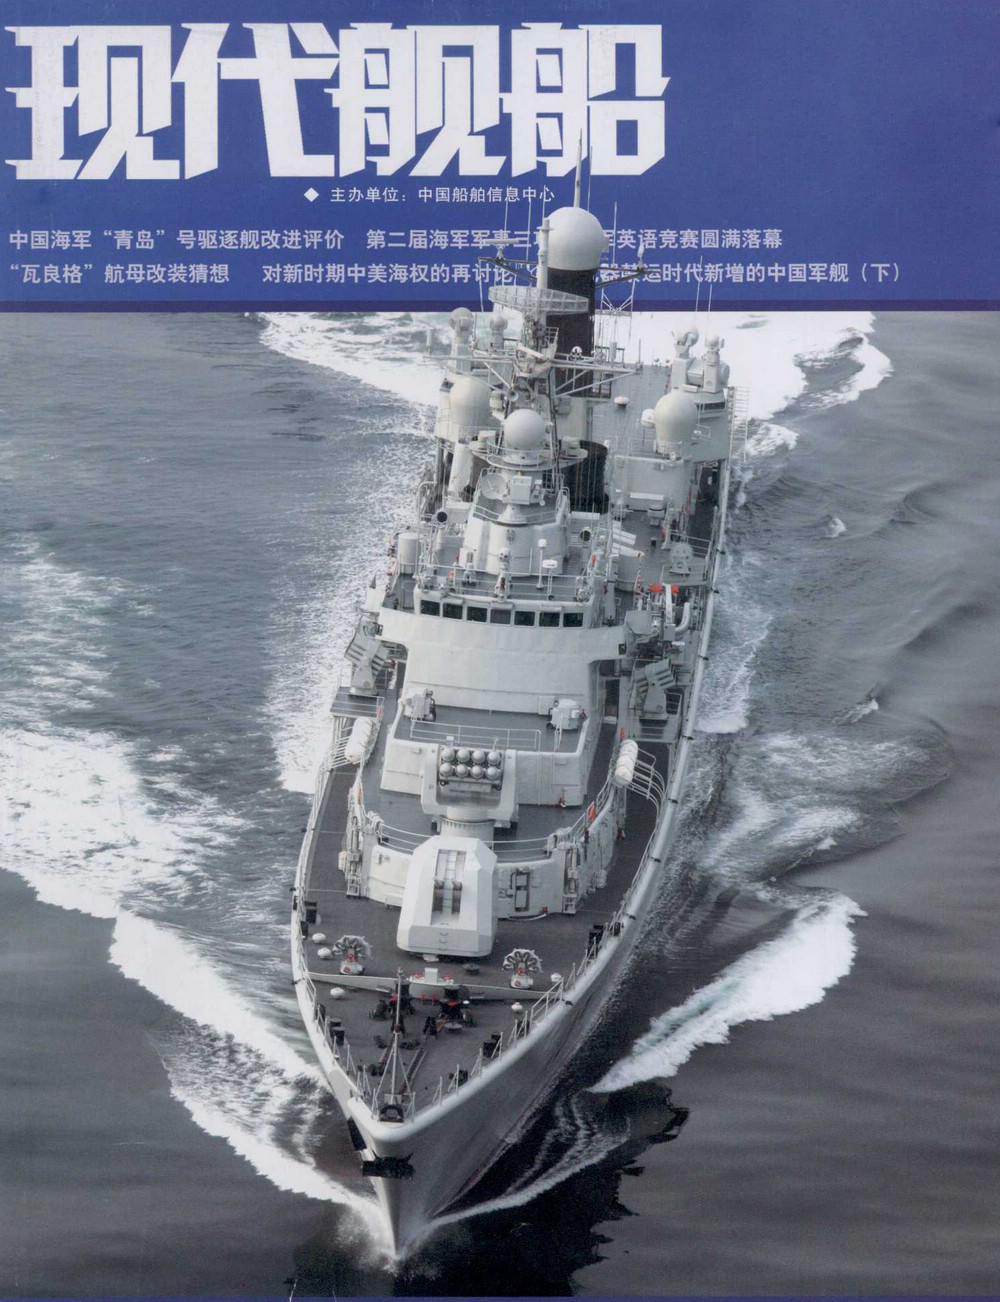 112+Harbin+113+Qingdao+Type+052+Luhu-class+guided+missile+destroyers+people%2527s+Liberation+Army+Navy+%2528PLAN%2529+YJ-83+%2528C-803%2529+anti-ship+missiles+HQ-7+SAM+%2528Type+730%2529+7-barrel+30+mm+CIWS+%25287%2529.jpg